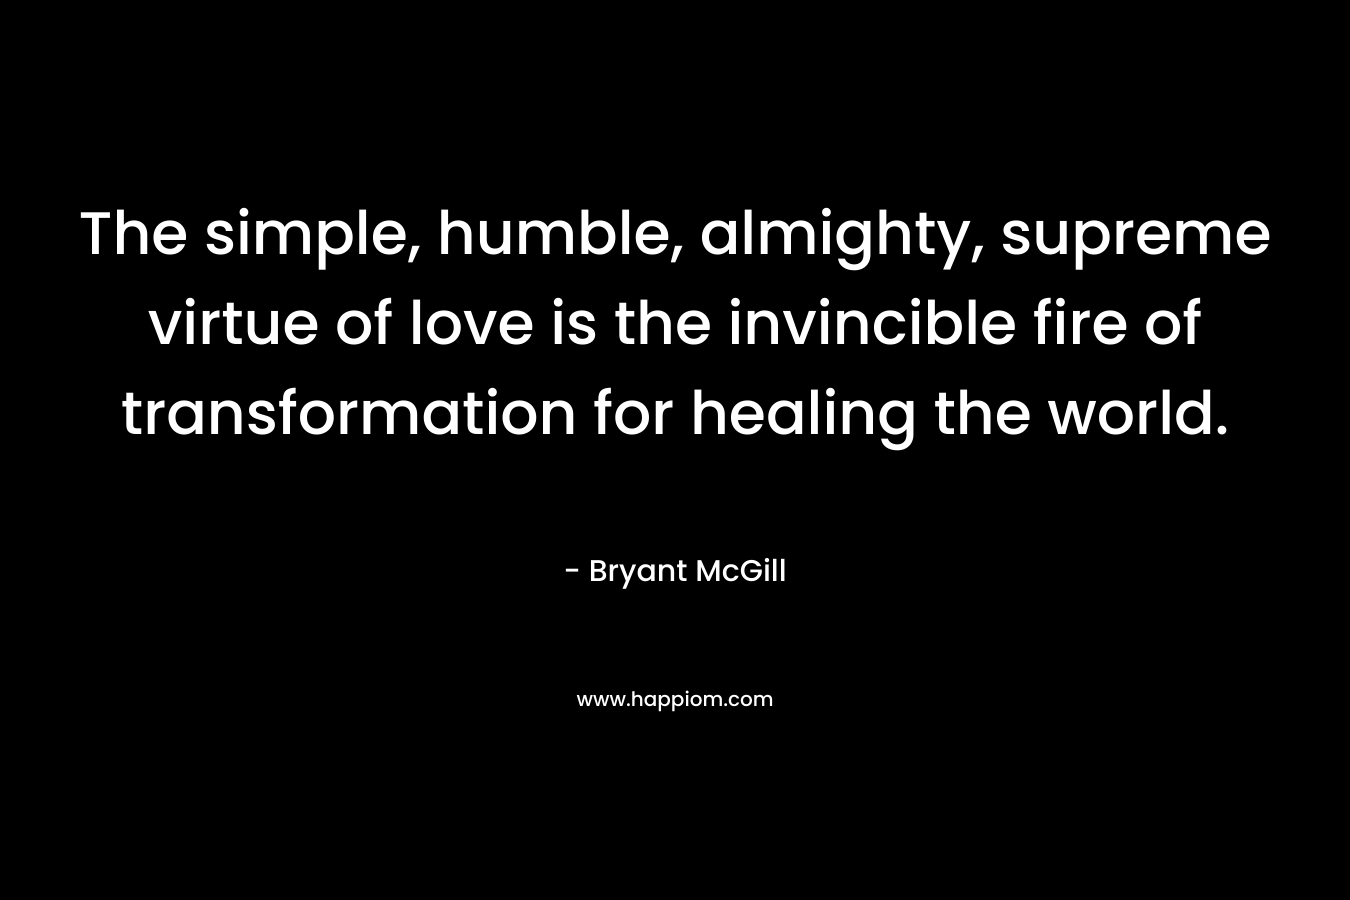 The simple, humble, almighty, supreme virtue of love is the invincible fire of transformation for healing the world.